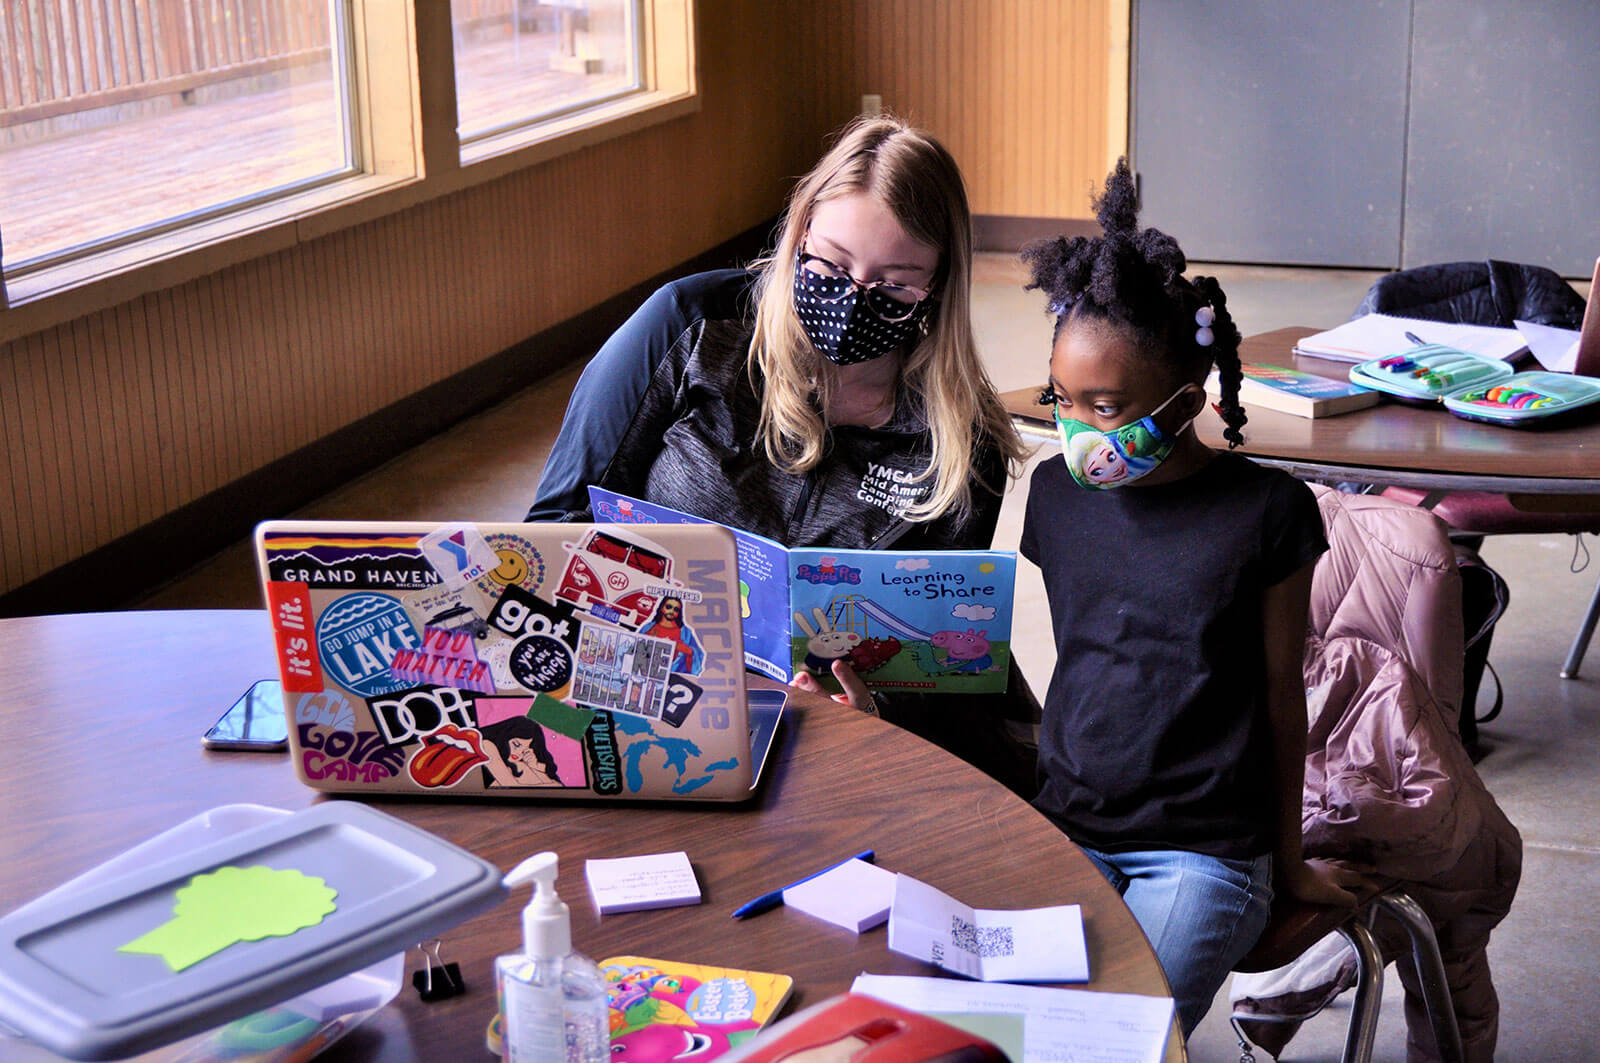 The Charles Stewart Mott Foundation support the Flint community by supporting education, as shown here, and through many other efforts. (Image via the Charles Stewart Mott Foundation website)